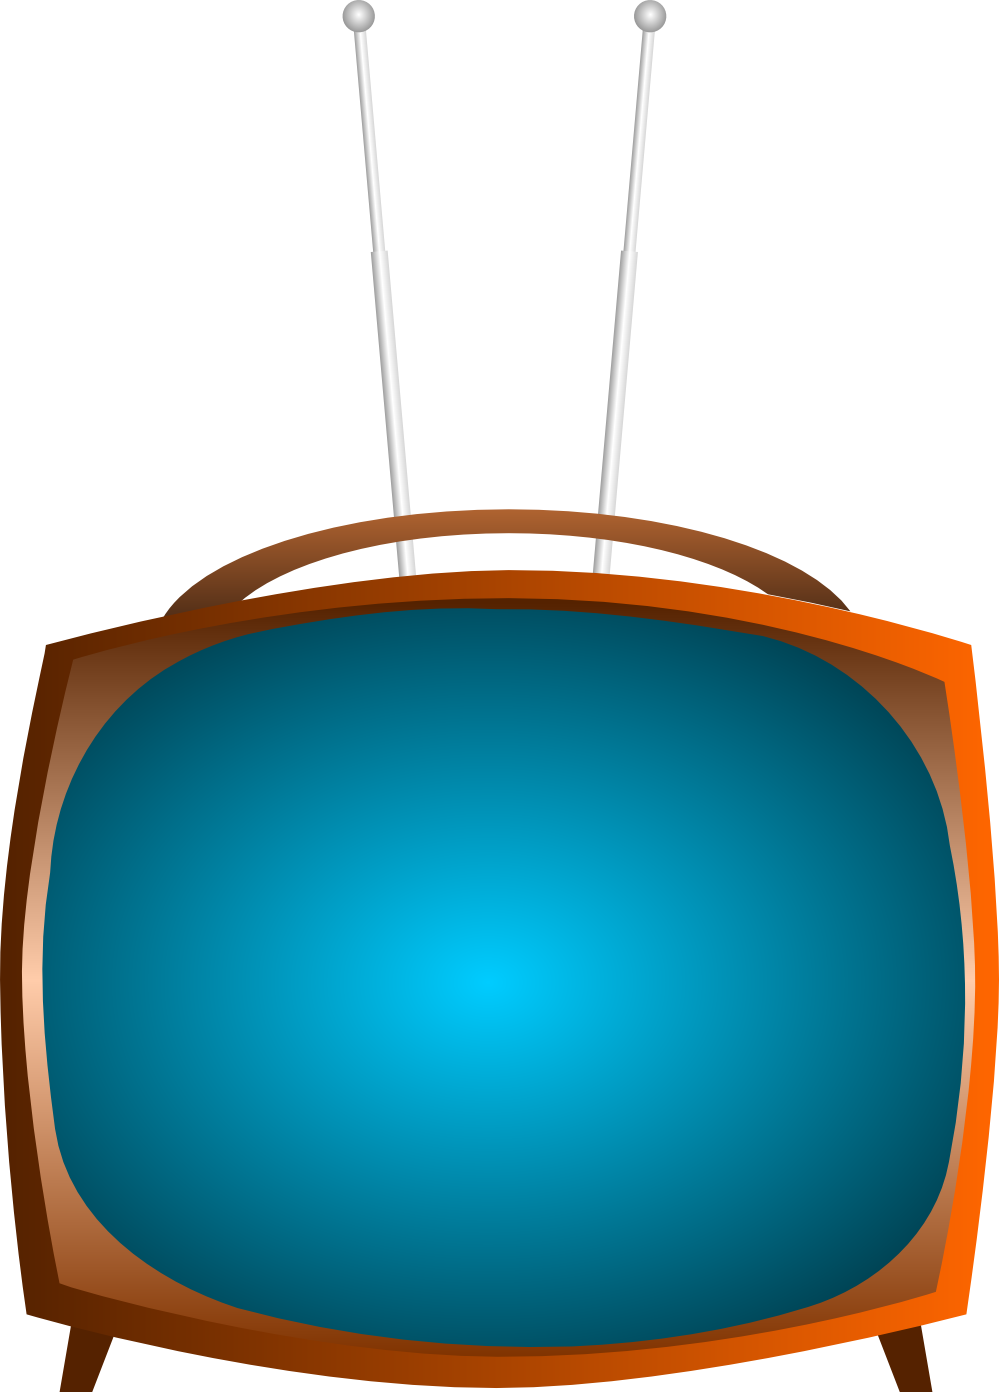 Tv Television 3 Image Famclipart Png Image Clipart